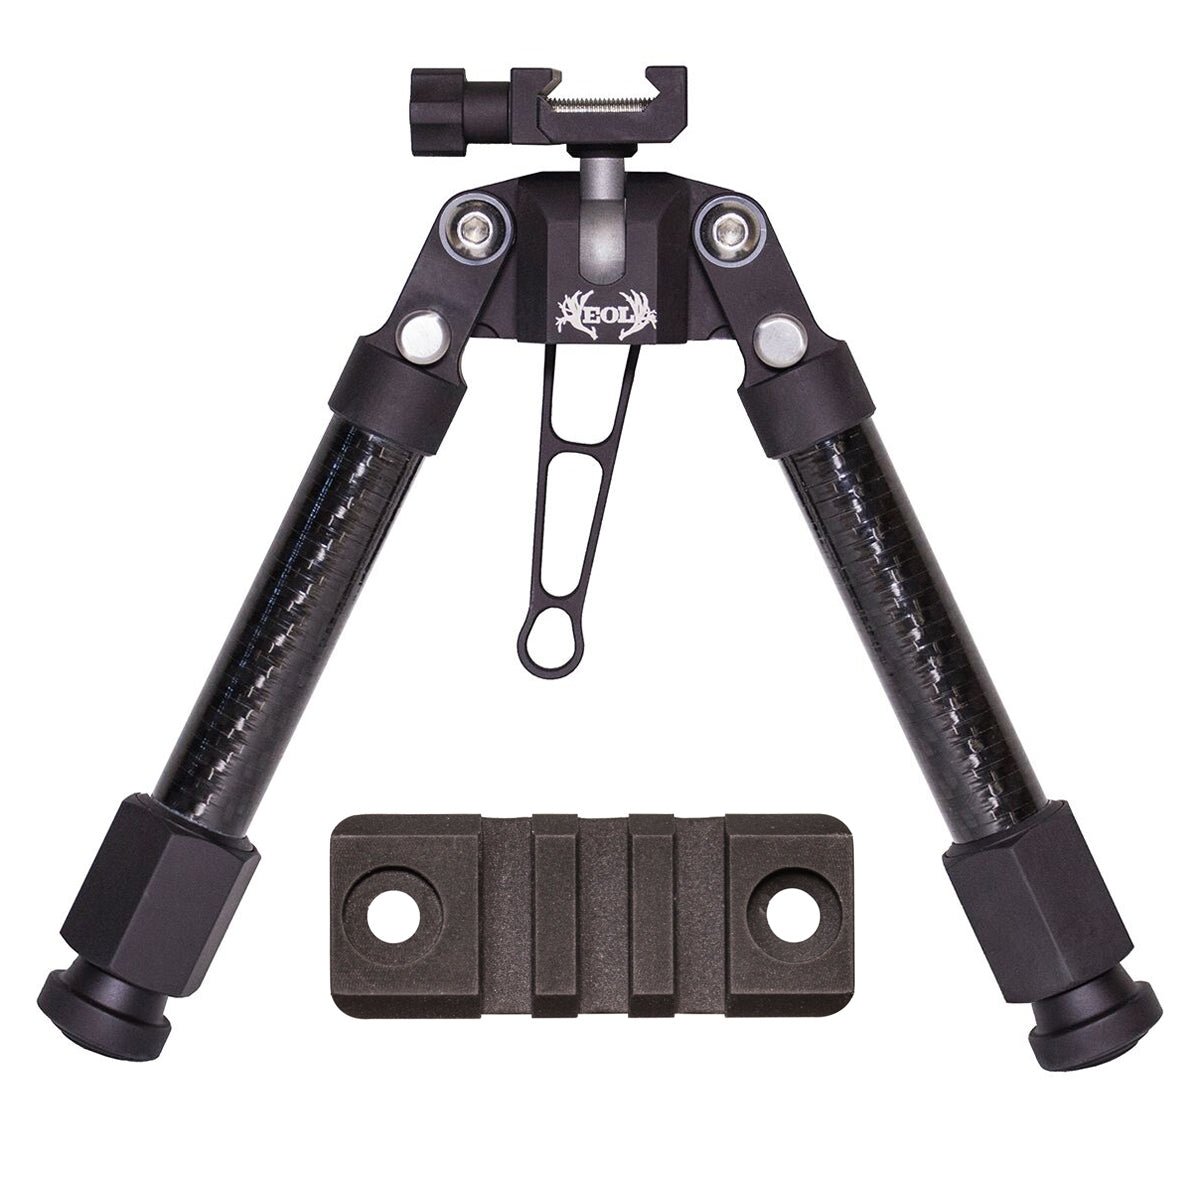 Rugged Ridge Outdoor Gear Extreme Bipod with Free Picatinny Rail by Rugged Ridge | Gear - goHUNT Shop